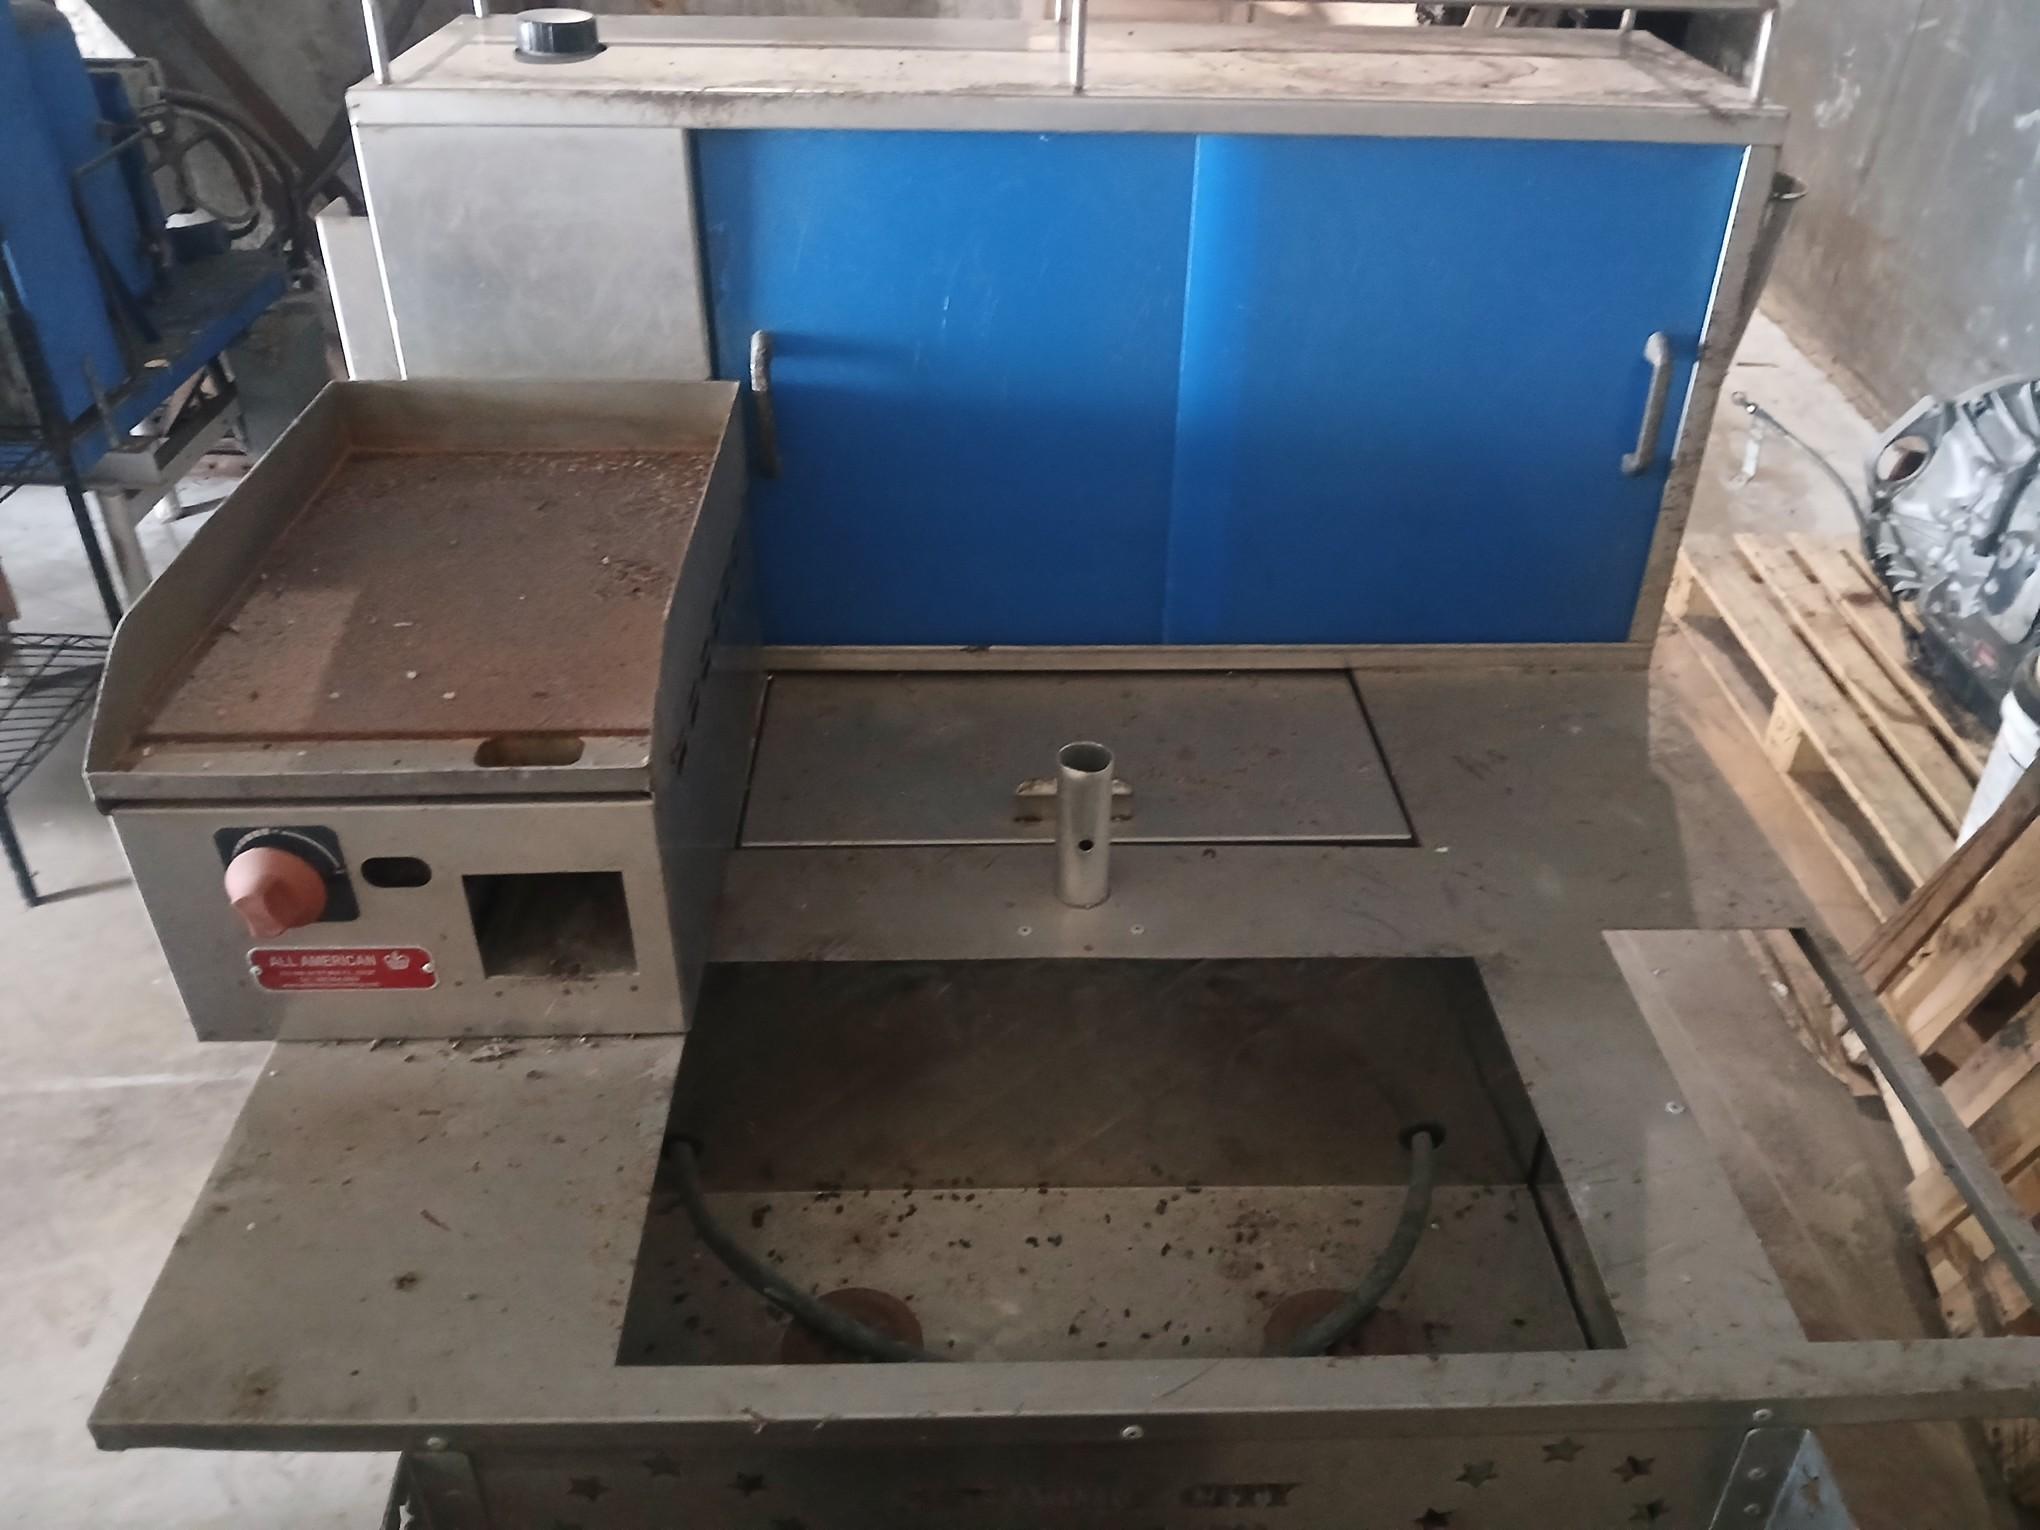 Commercial hot Dog Cart W/ Grill / Sink / White & Dark Water & Tow Hitch - Looks to be in good shape